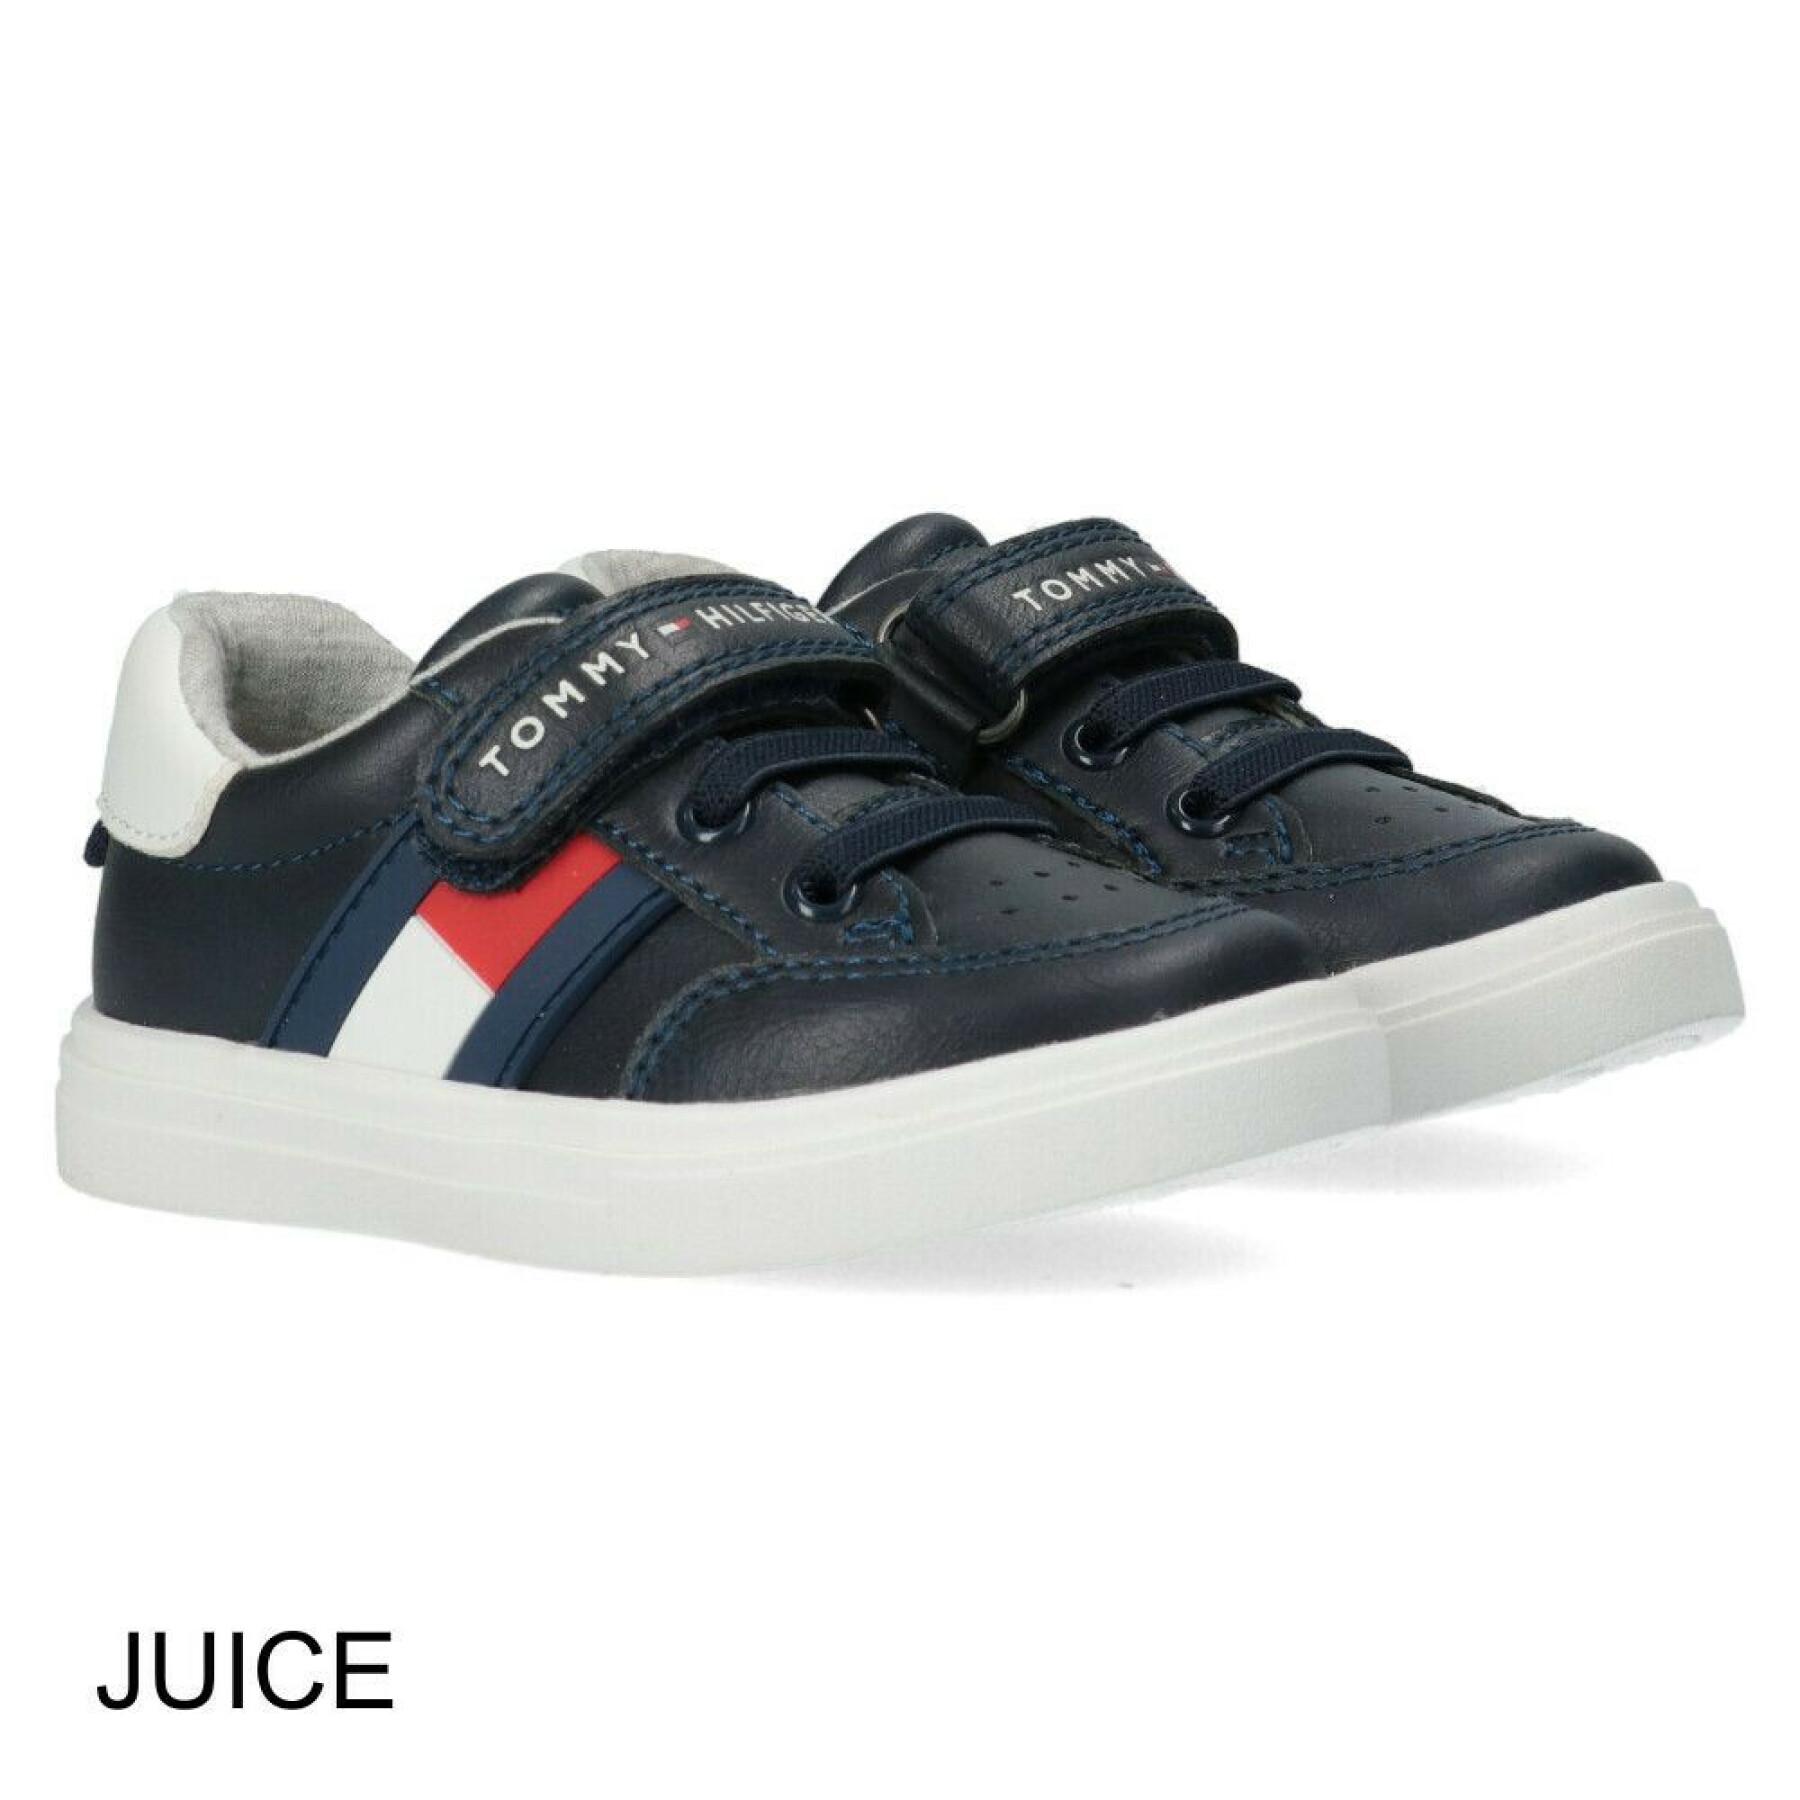 Baby lace sneakers Tommy Hilfiger Velcro